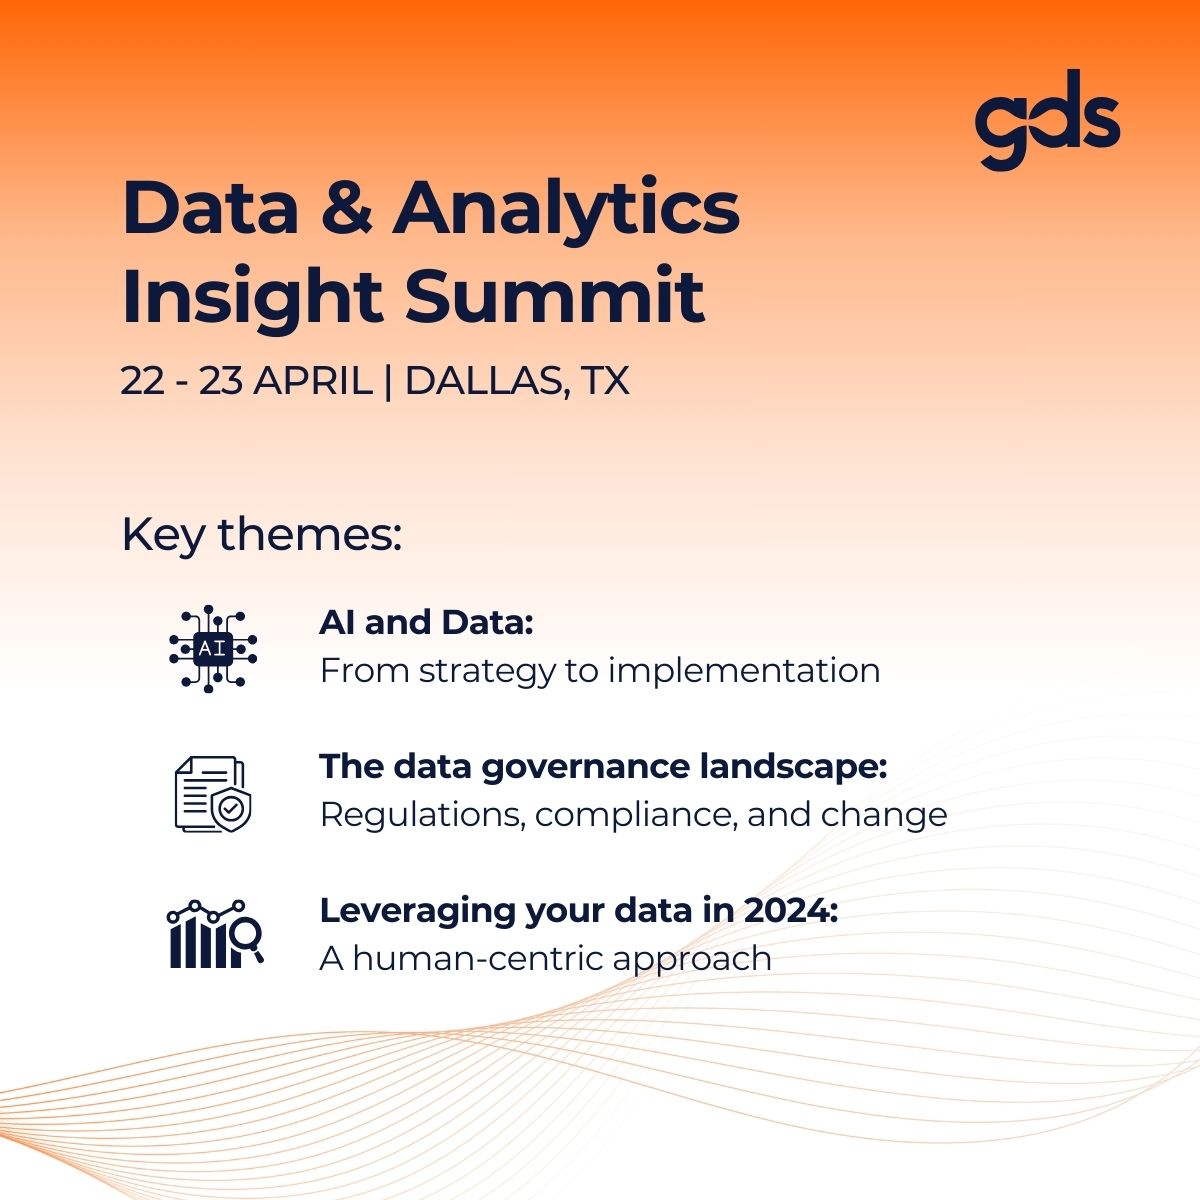 No matter how smart or advanced technology becomes, it will only be as good as the data it analyses. In two weeks, we'll be discussing all things data at the GDS Data & Analytics Summit. gdsgroup.com/events/summit/ #GDSSummits #DataAndAnalytics #AI #DataGovernance #HumanCentric